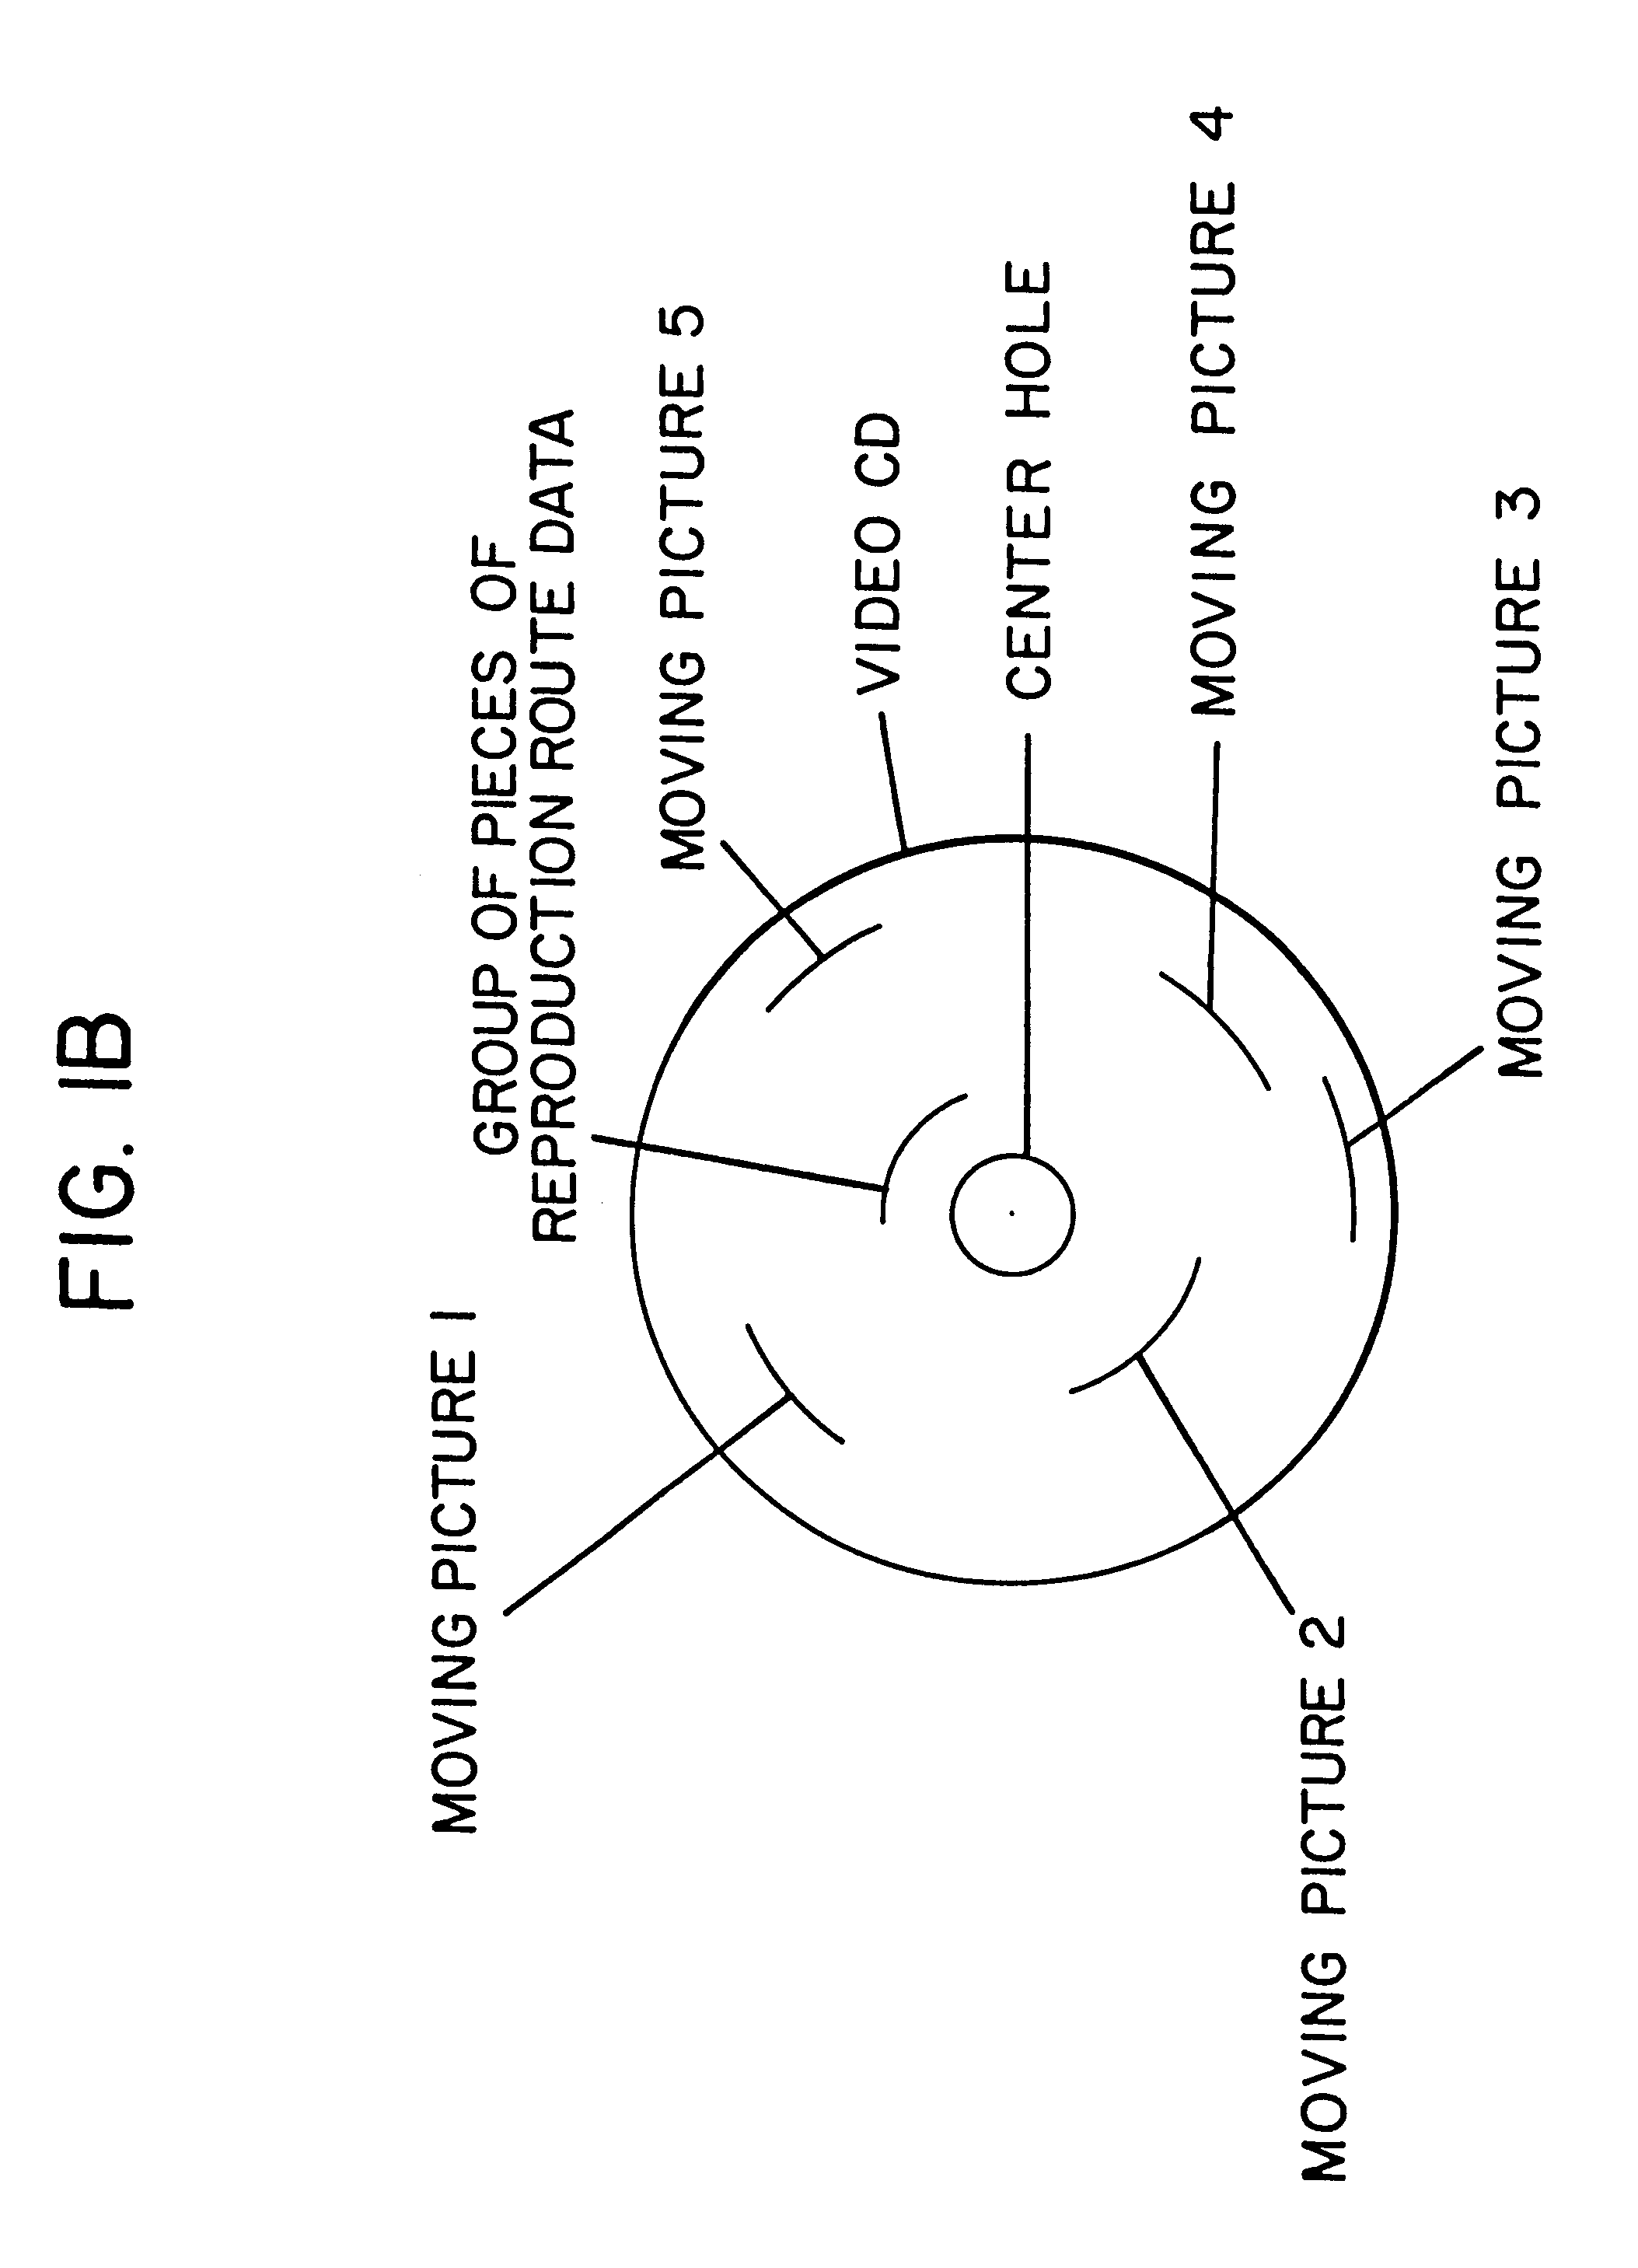 Machine readable recording medium, reproduction apparatus and method for controlling selection of menu items within a video object